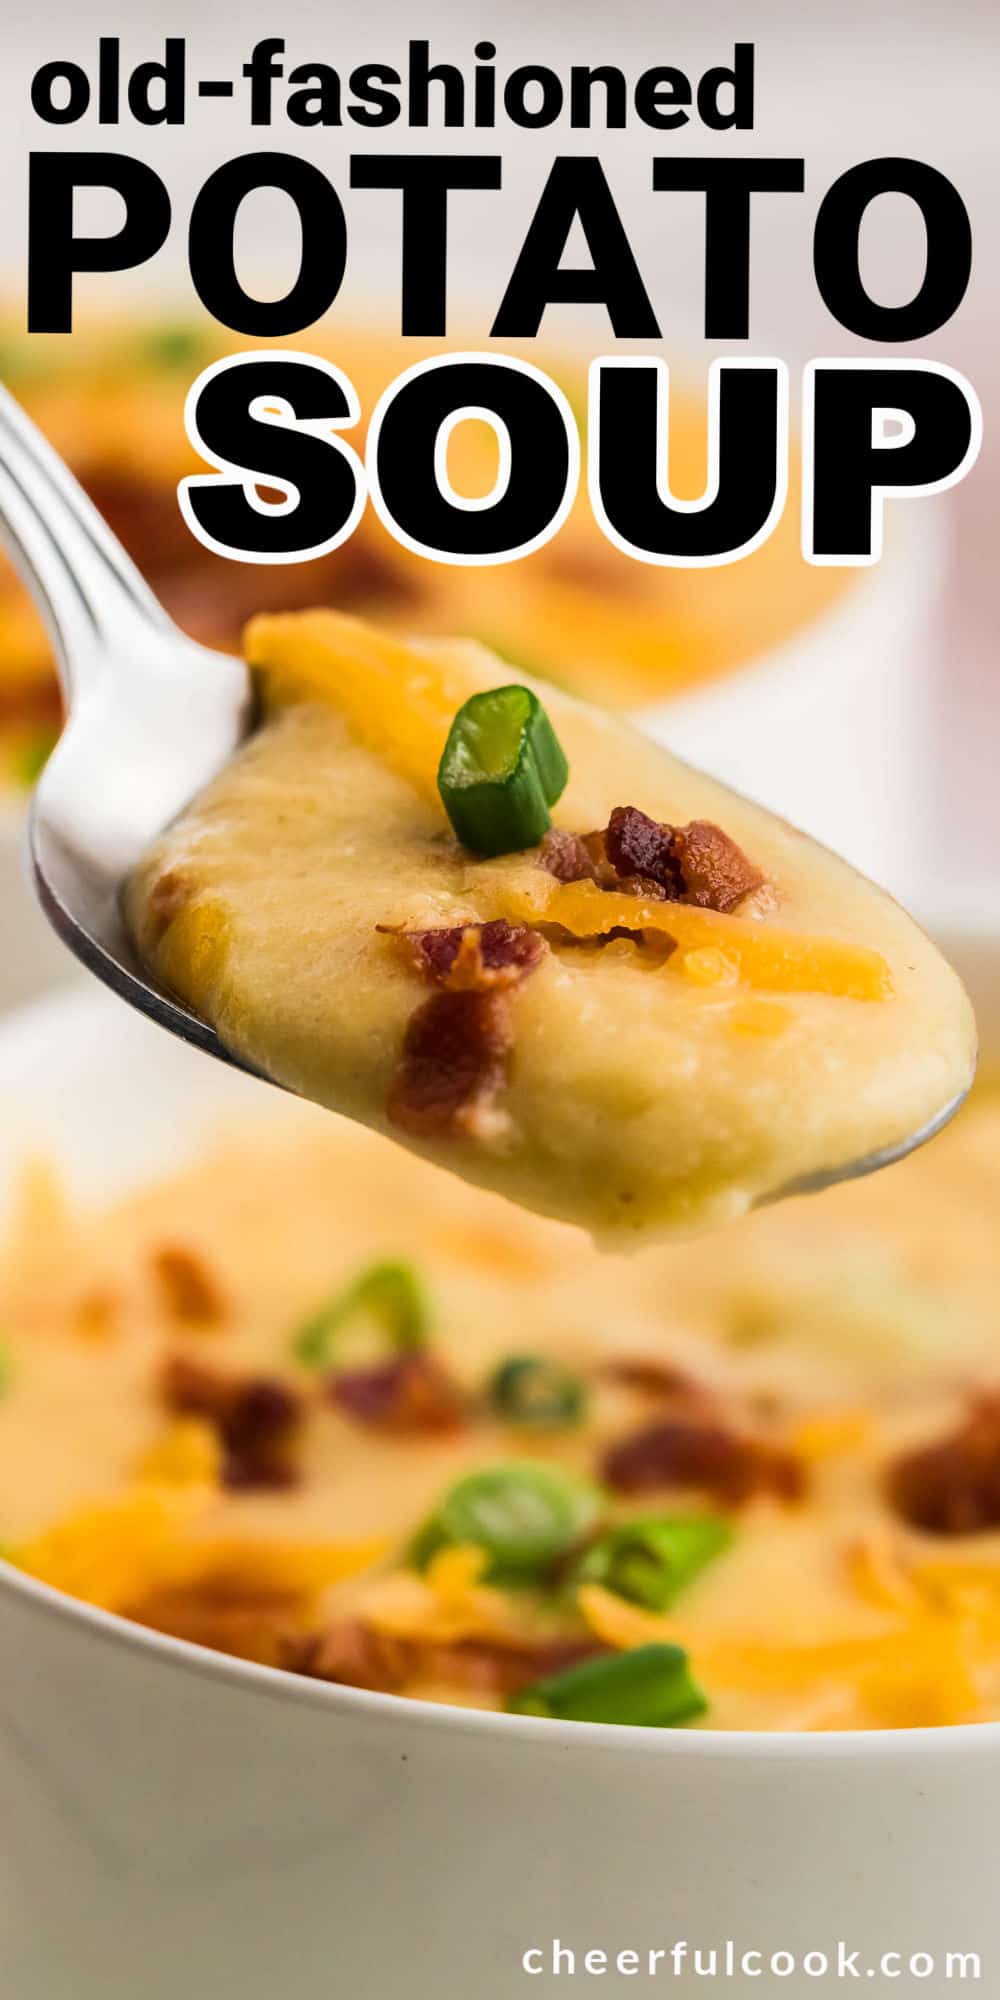 Get cozy with this rich and creamy Old Fashioned Potato Soup. This recipe has comfort food written all over it. Tender potatoes, onions, and crispy bacon turned into a delicious rich and creamy soup. #cheerfulcook #potatosoup #recipe #comfortfood via @cheerfulcook